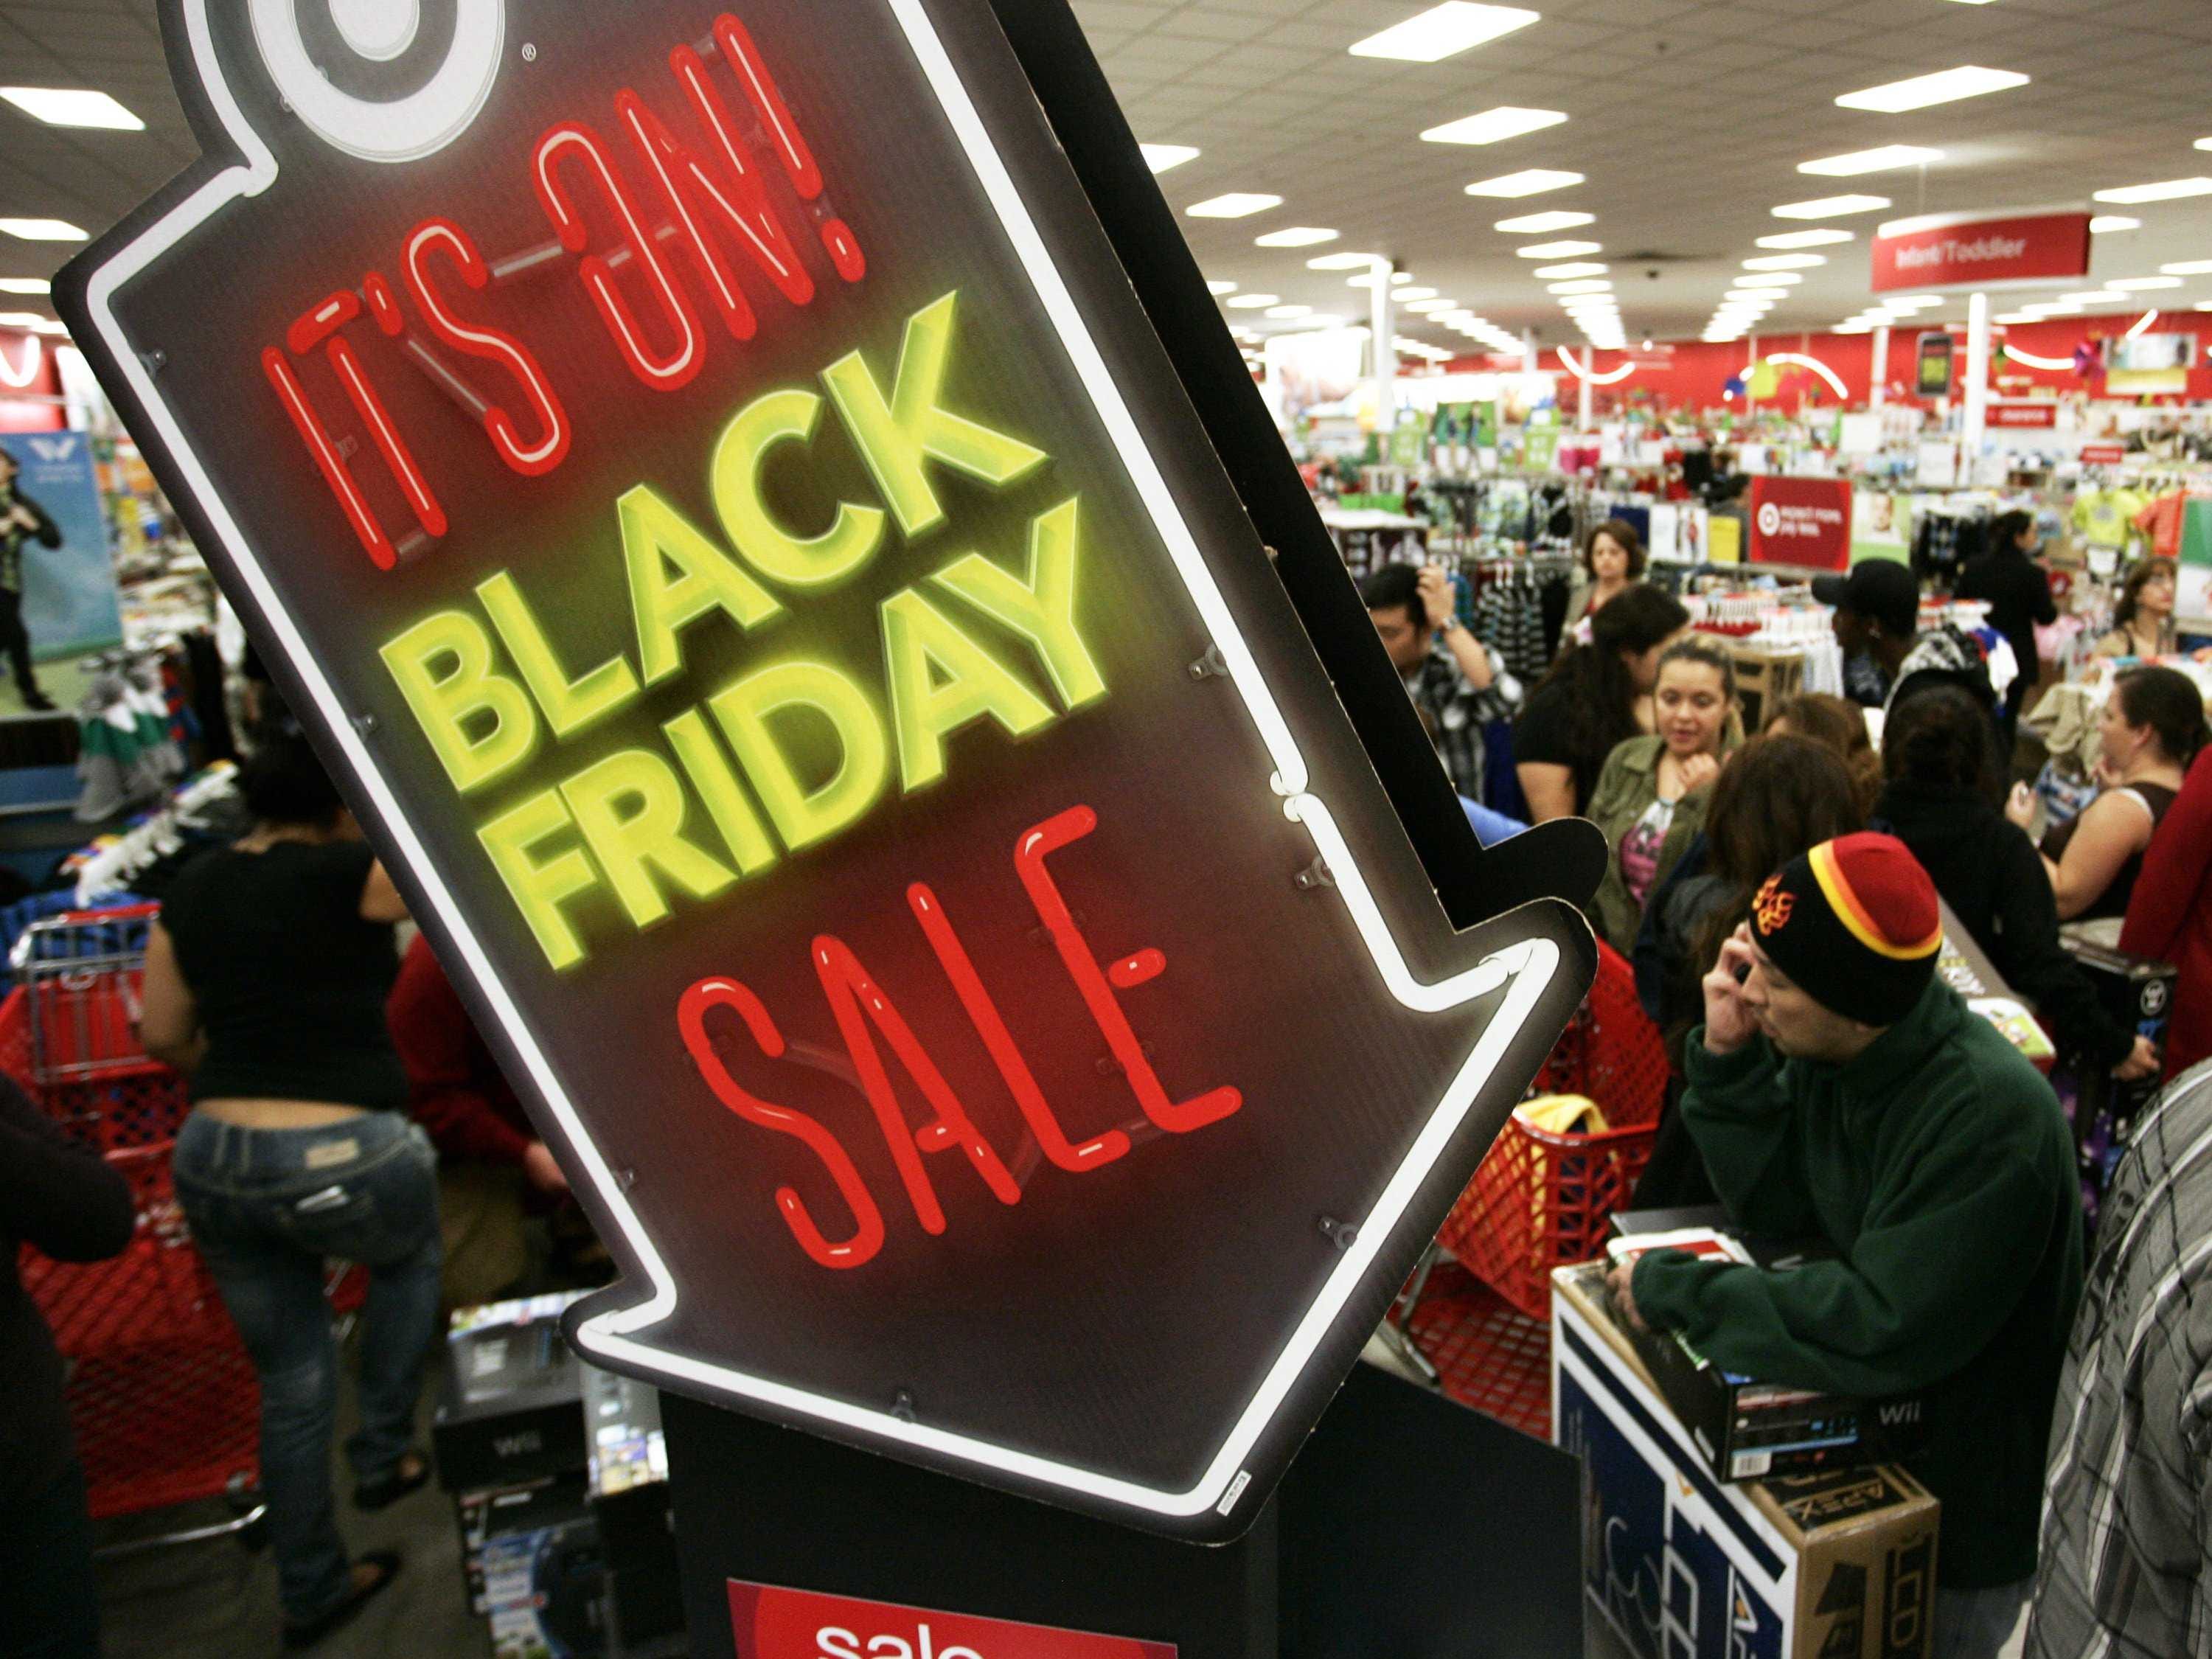 morgan-stanley-retailers-that-opened-early-on-thanksgiving-had-crappy-black-friday-sales.jpg